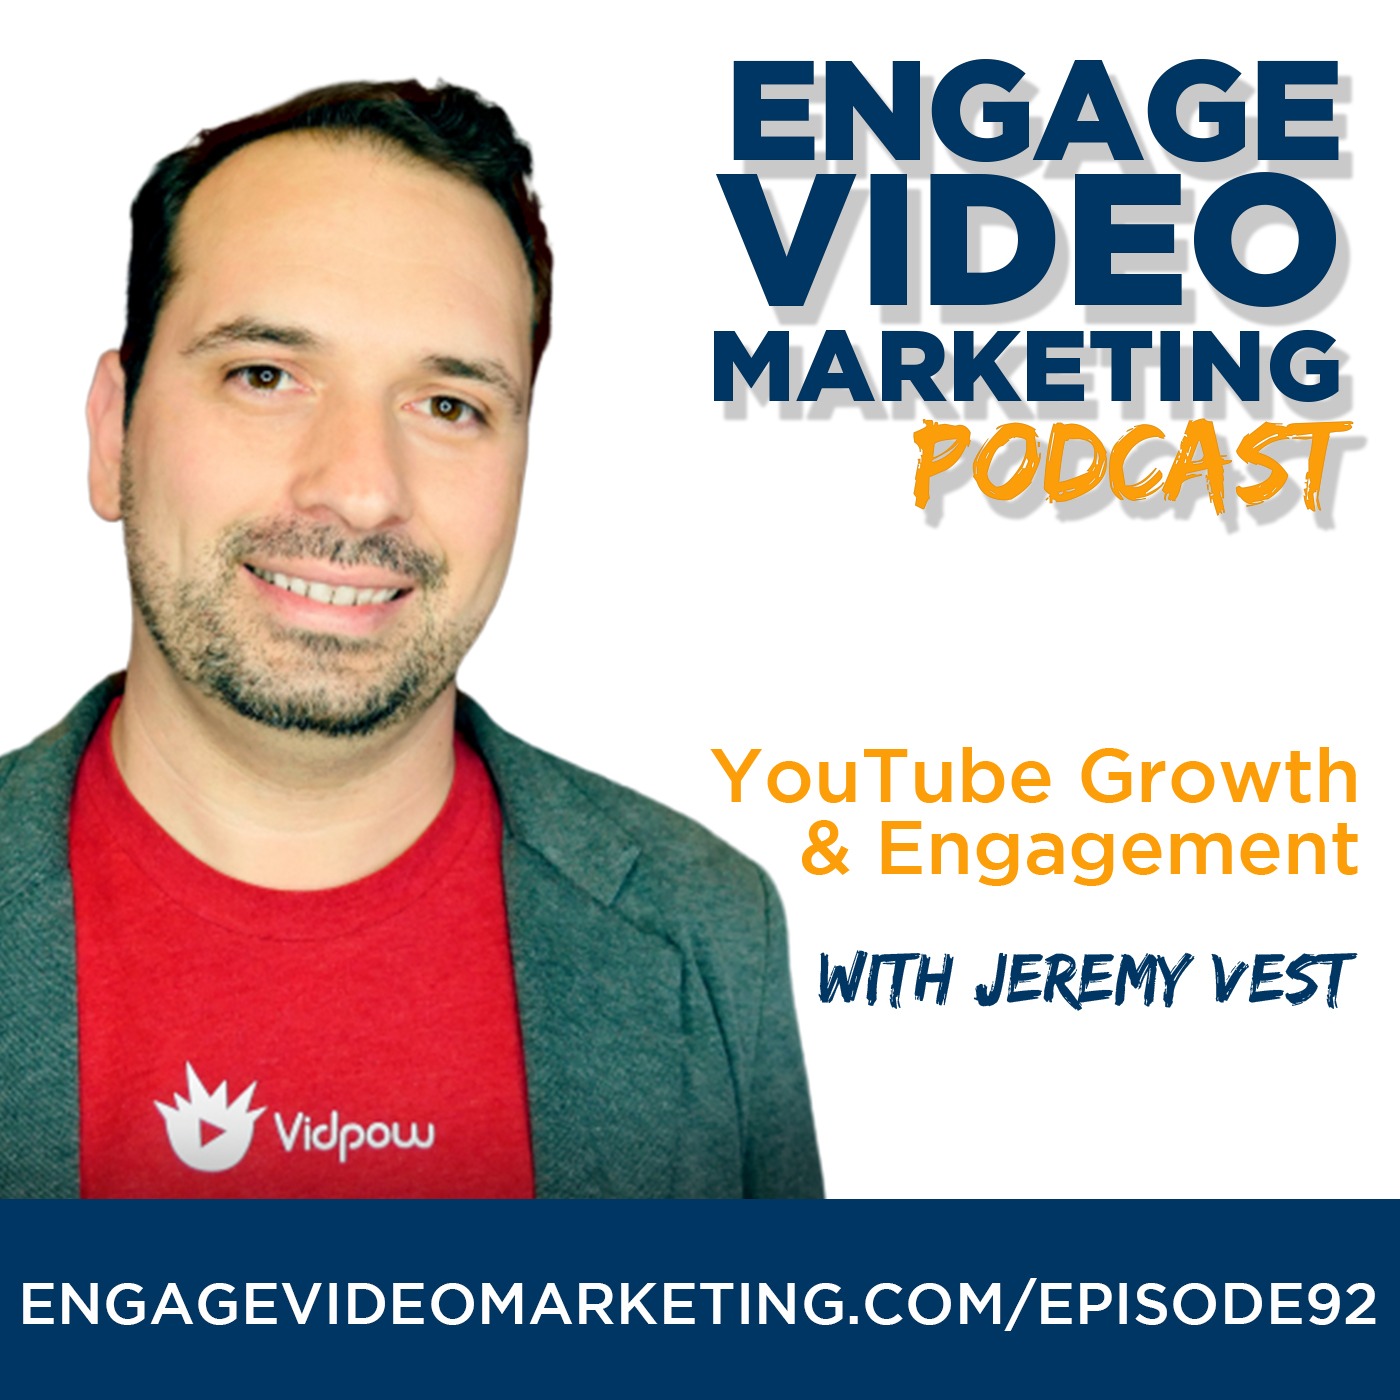 YouTube Growth and Engagement with Jeremy Vest from VidIQ